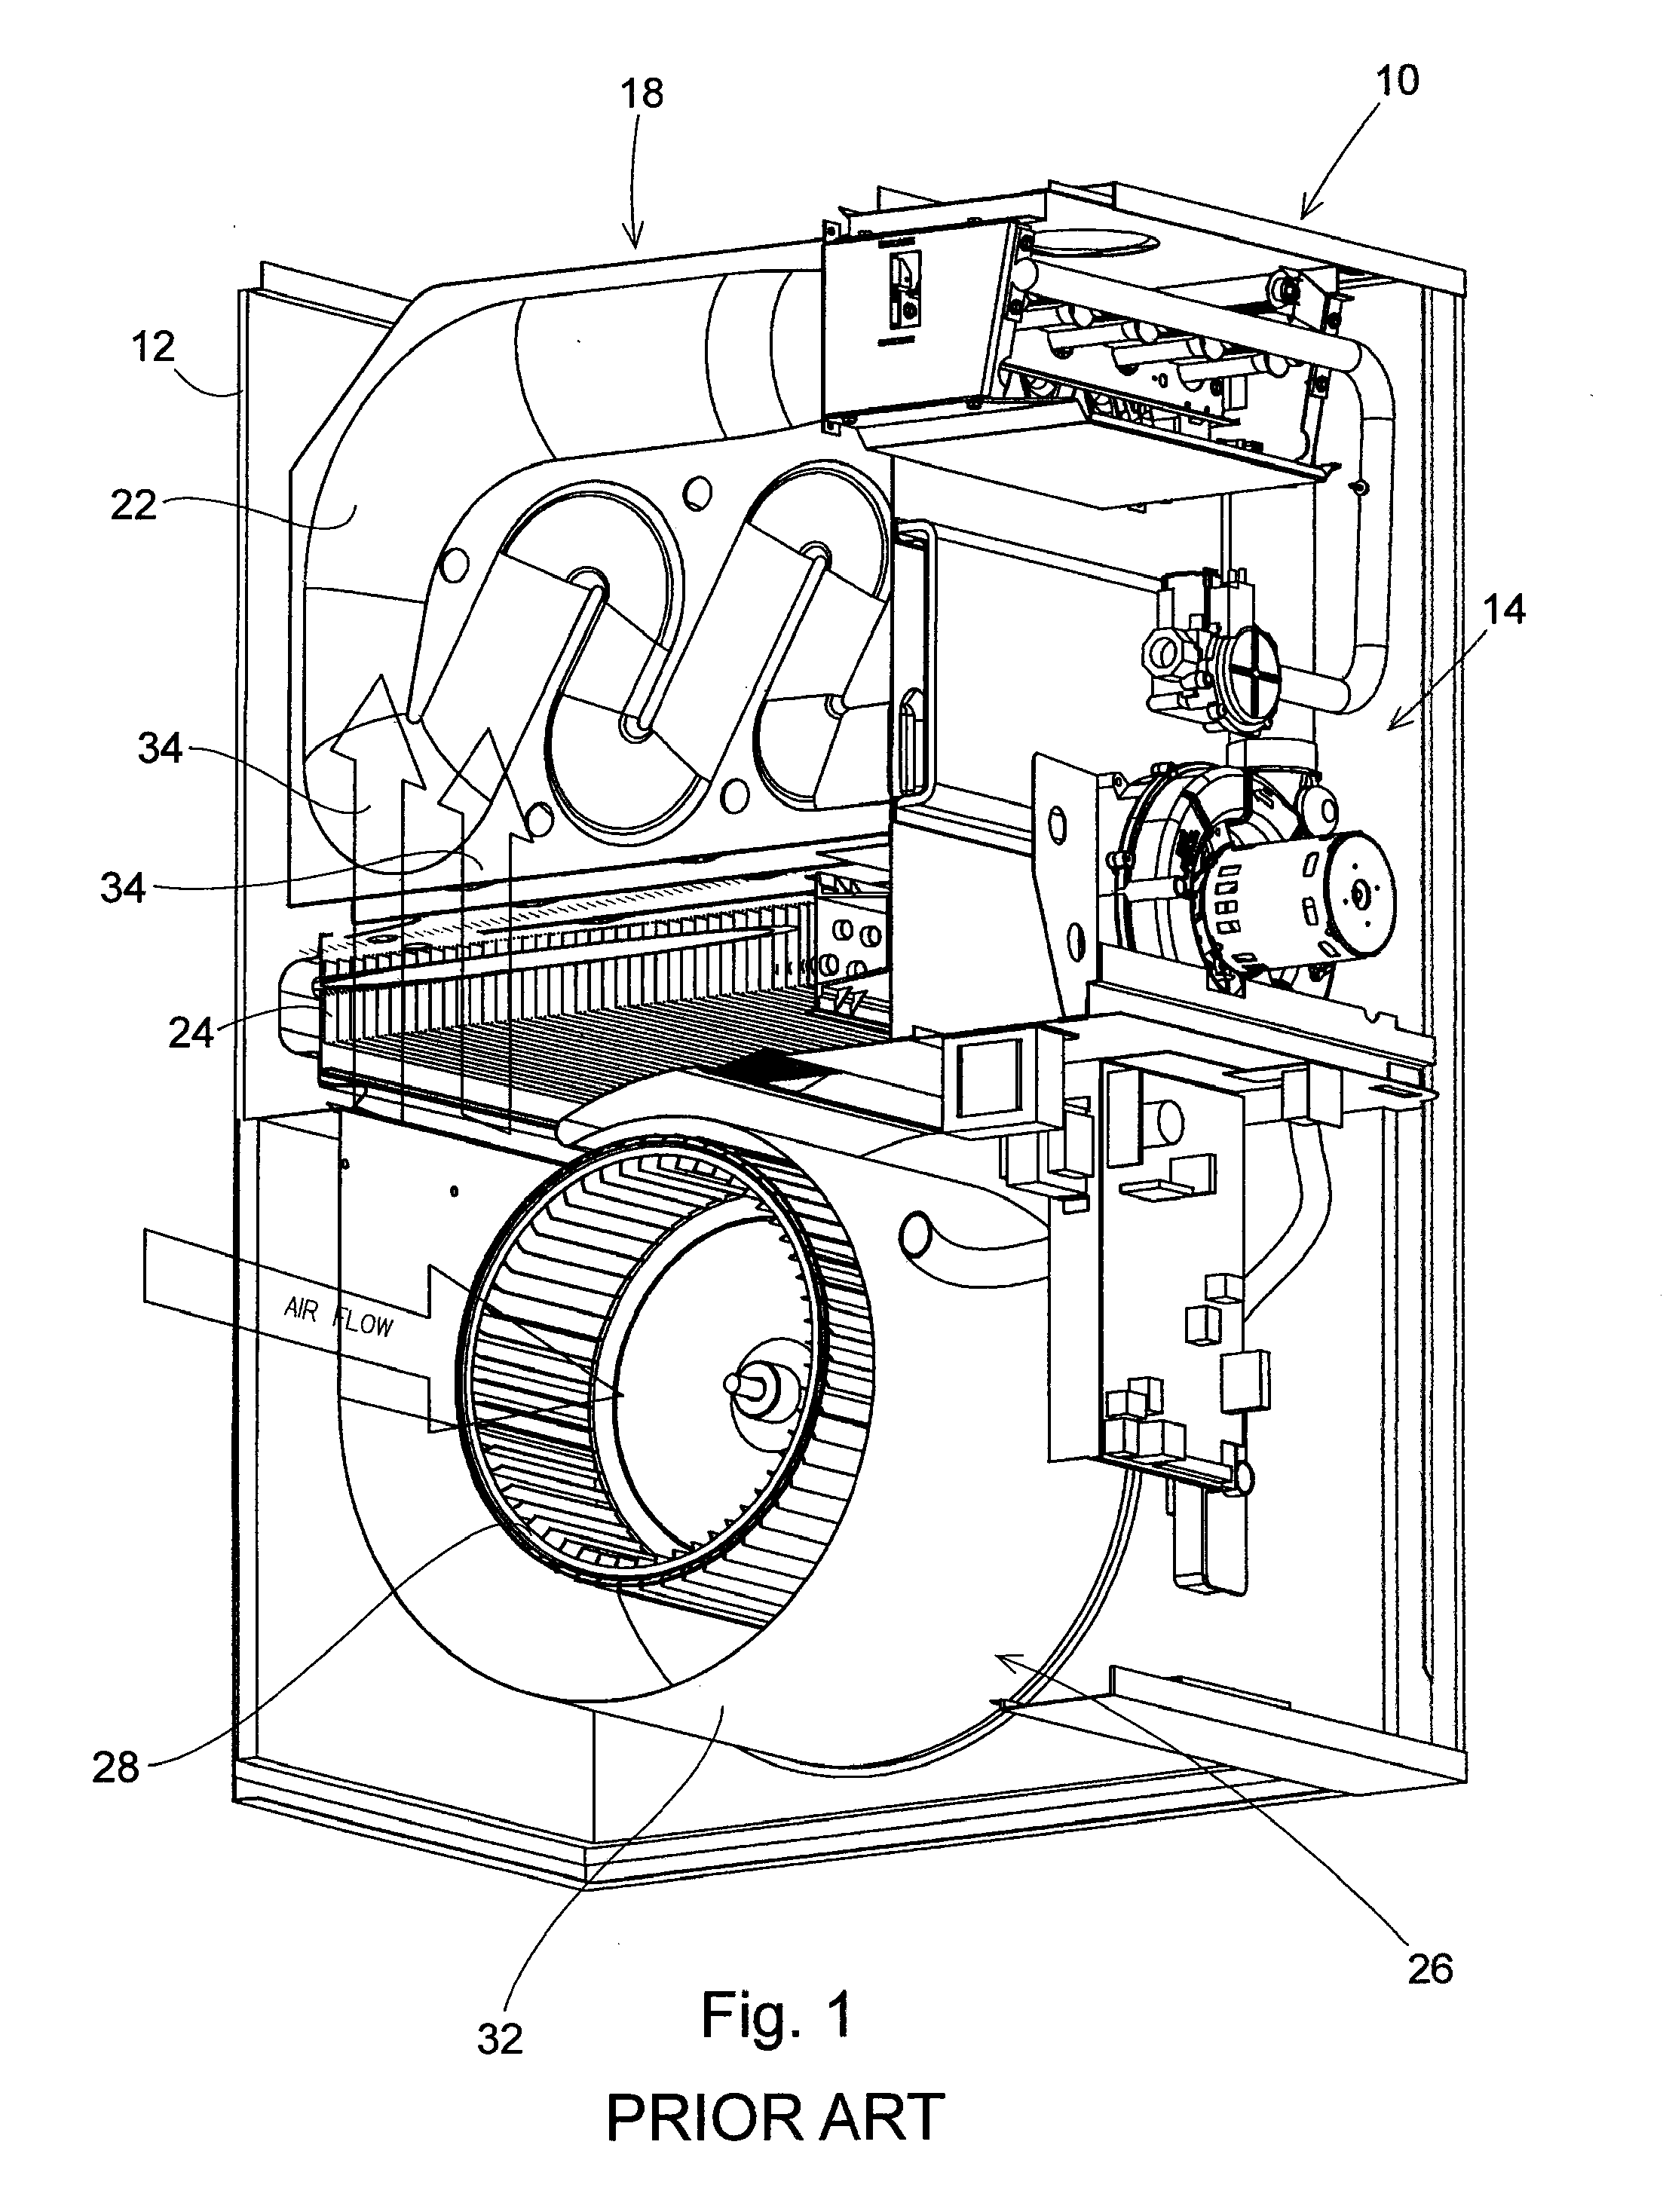 High Efficiency Furnace/Air Handler Blower Housing with a Side Wall Having an Exponentially Increasing Expansion Angle